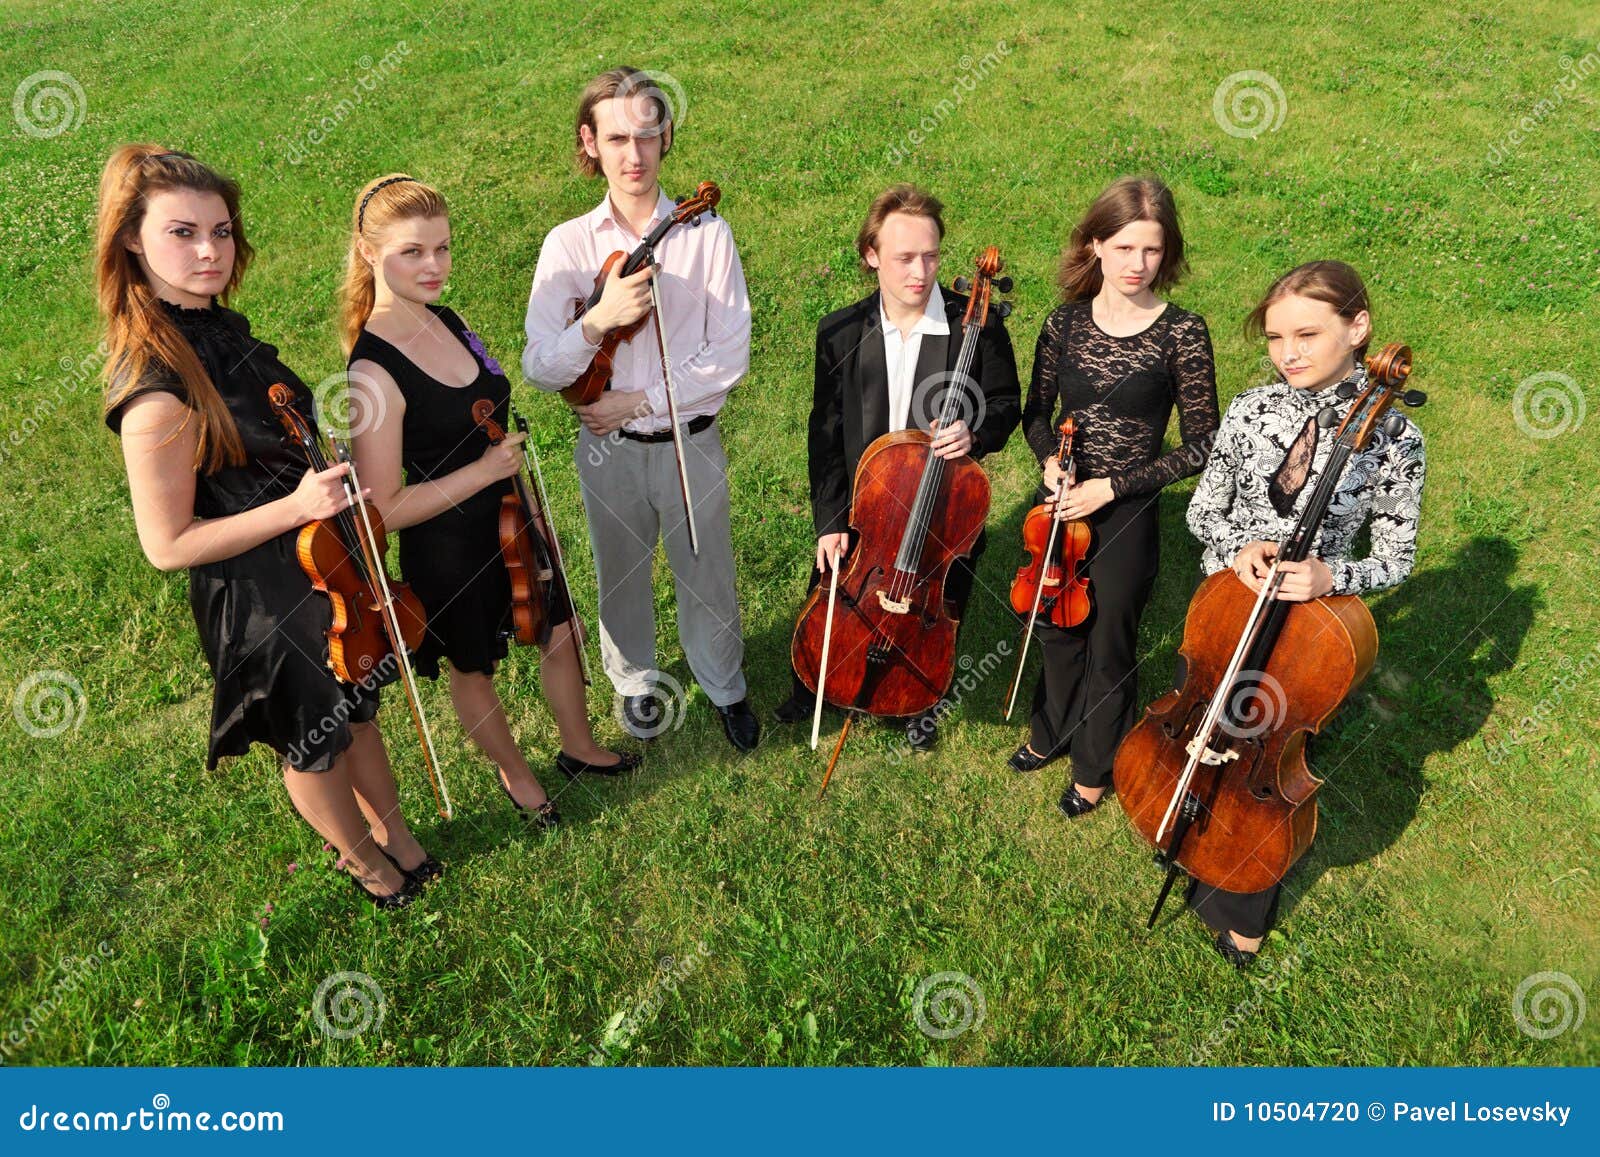 six violinists stand semicircle on grass